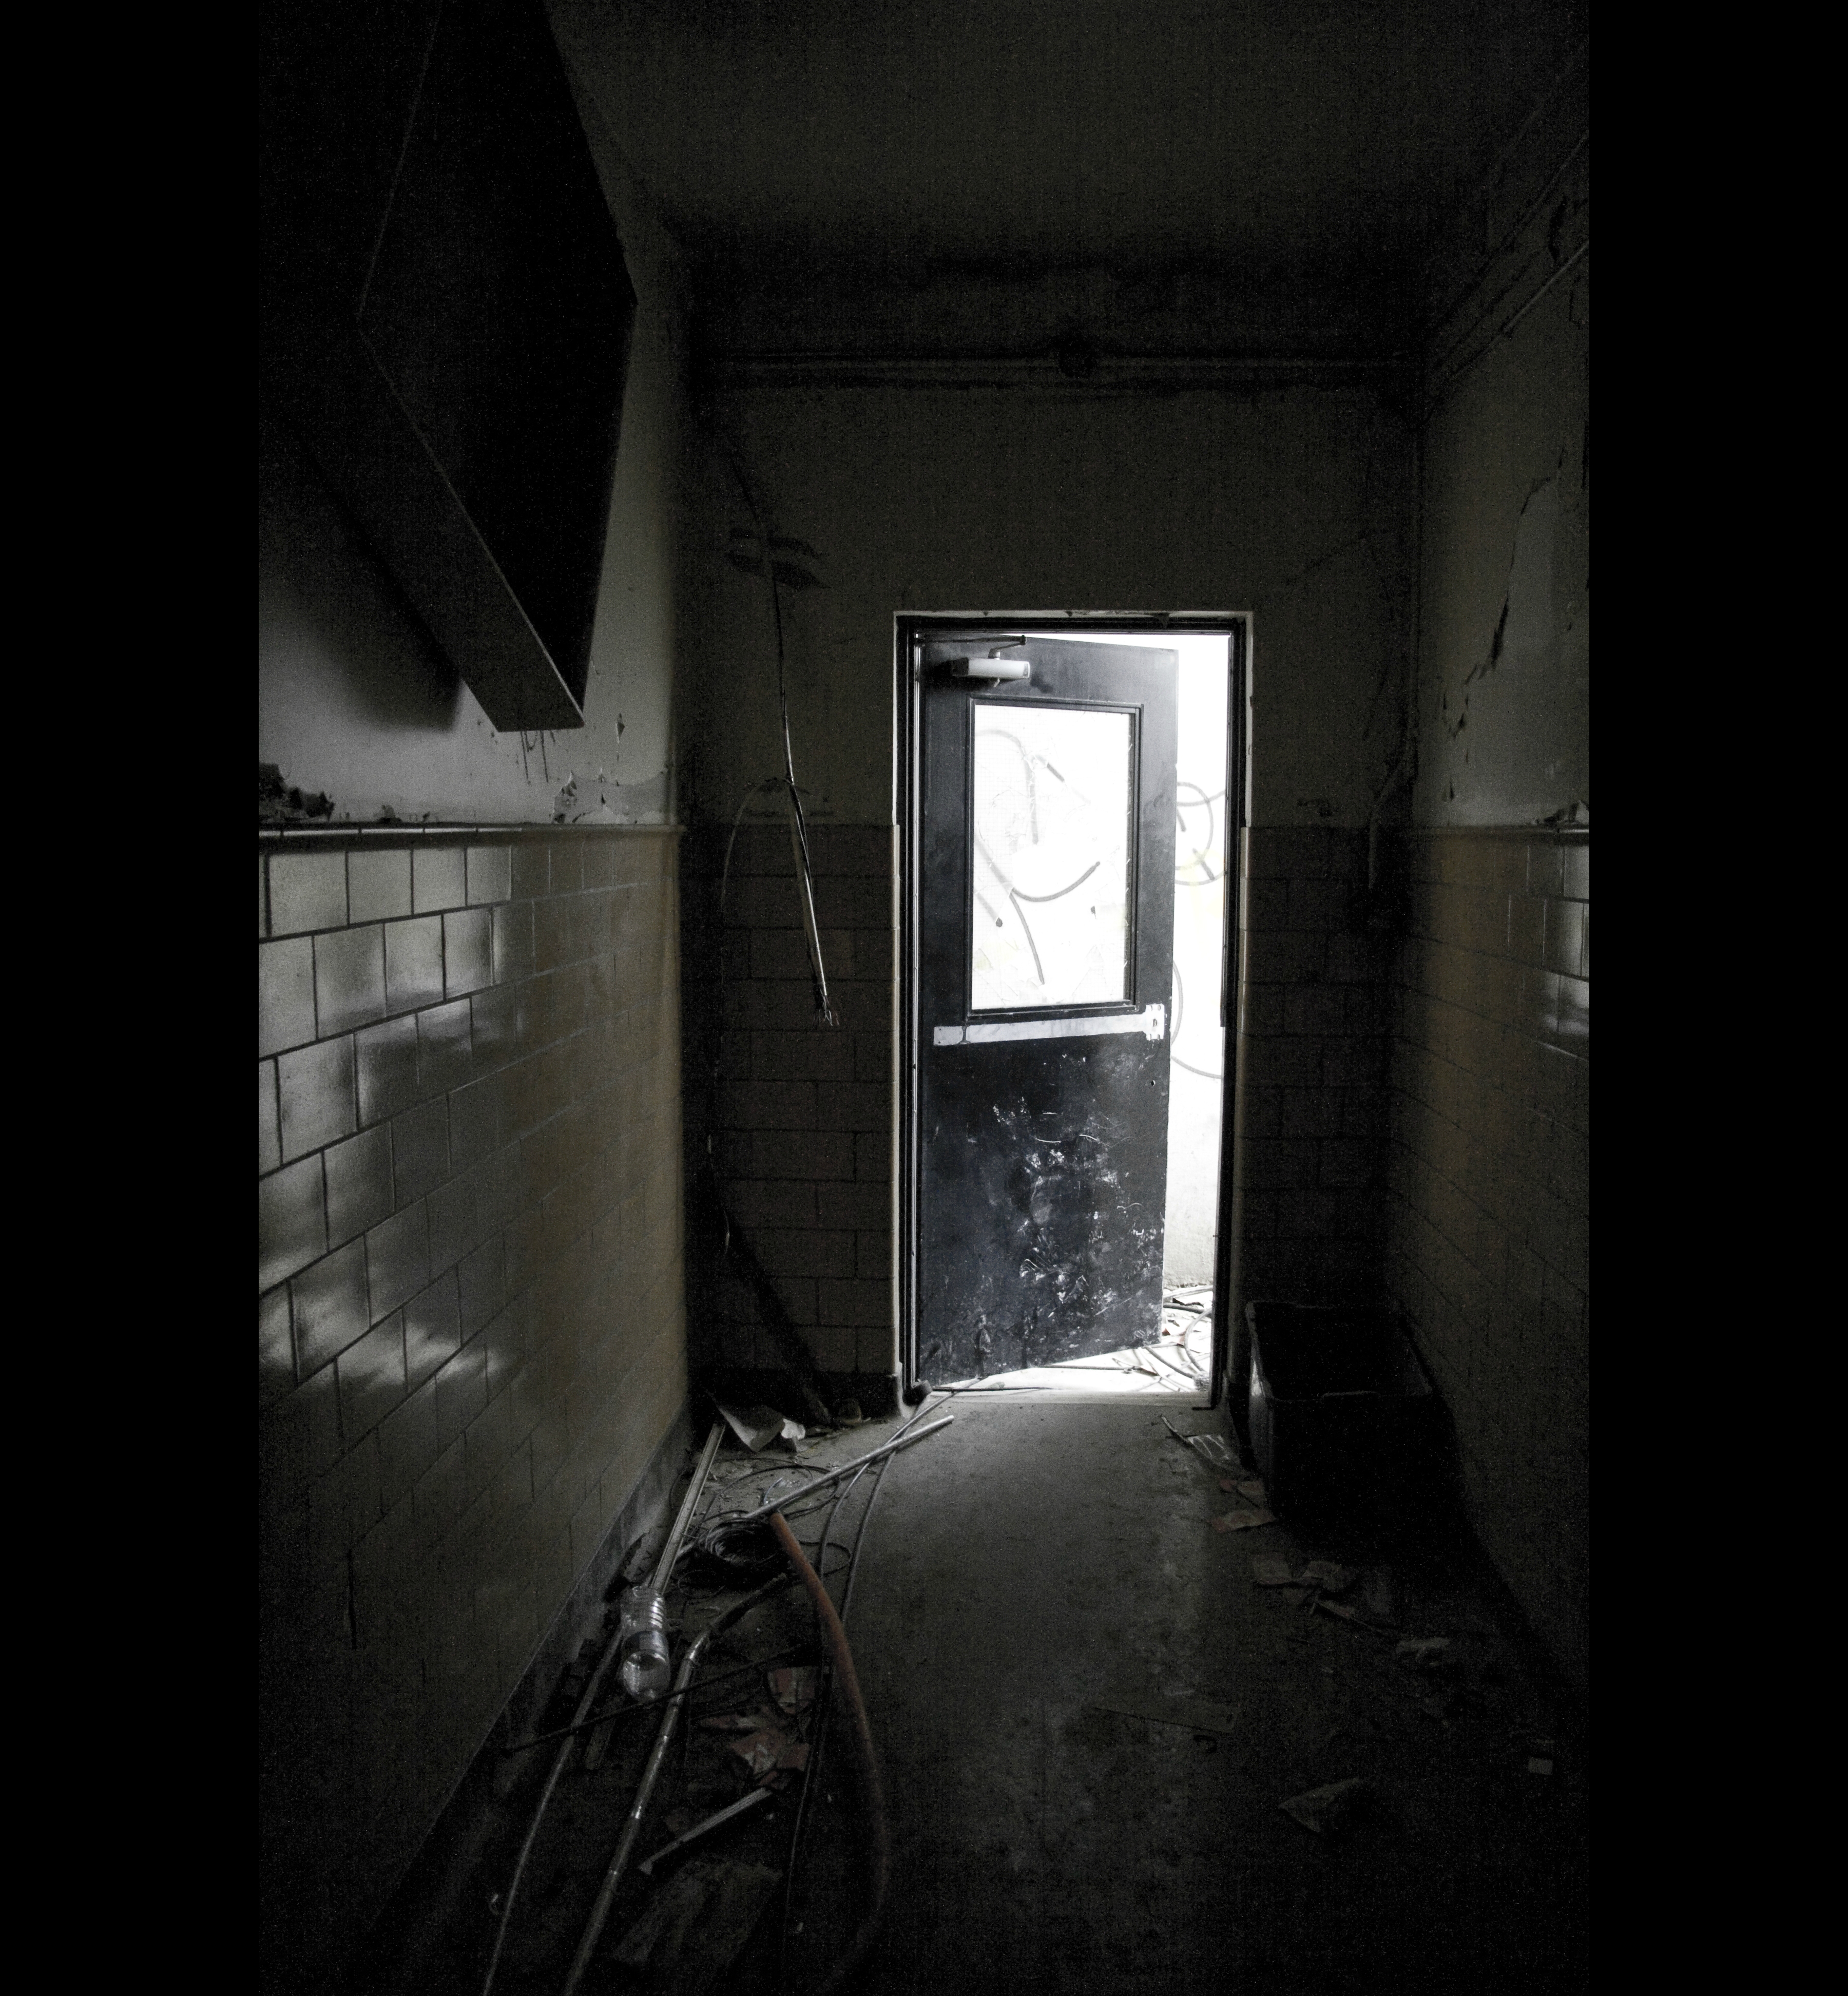 THE DARKNESS - Entering through the basement was scary. Only steps from the doorway, it was completely black. For a minute all was silent except the echoing creak of the building. Then there was the sound of a muffled thud from above. Then voices. Indistinct and quickly gone.